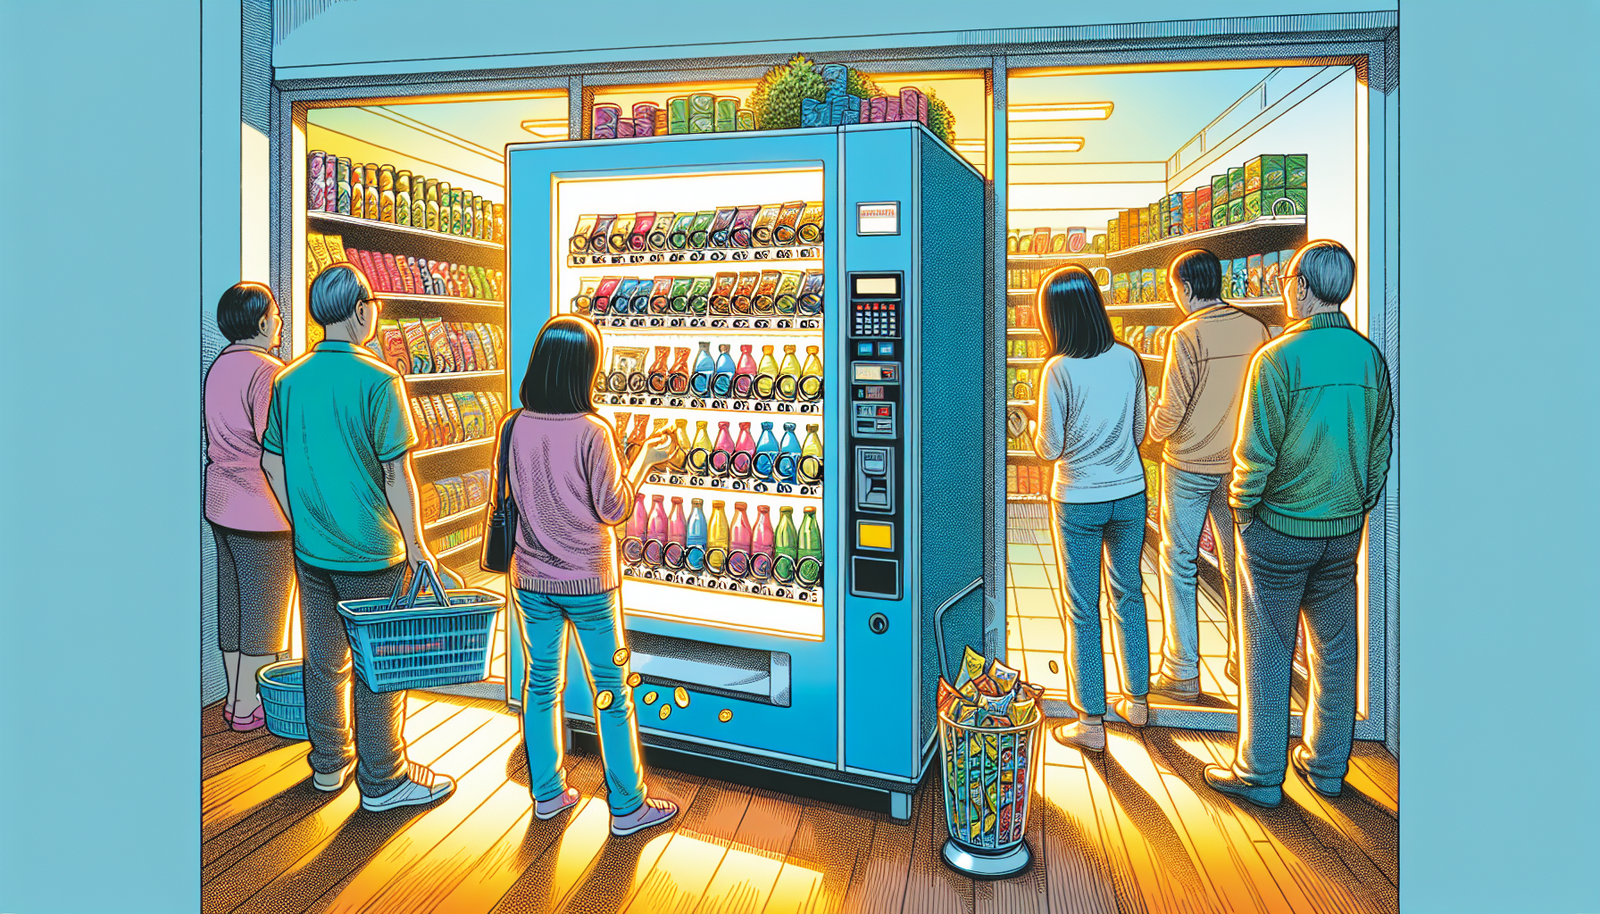 Illustration of a vending machine area in a laundromat